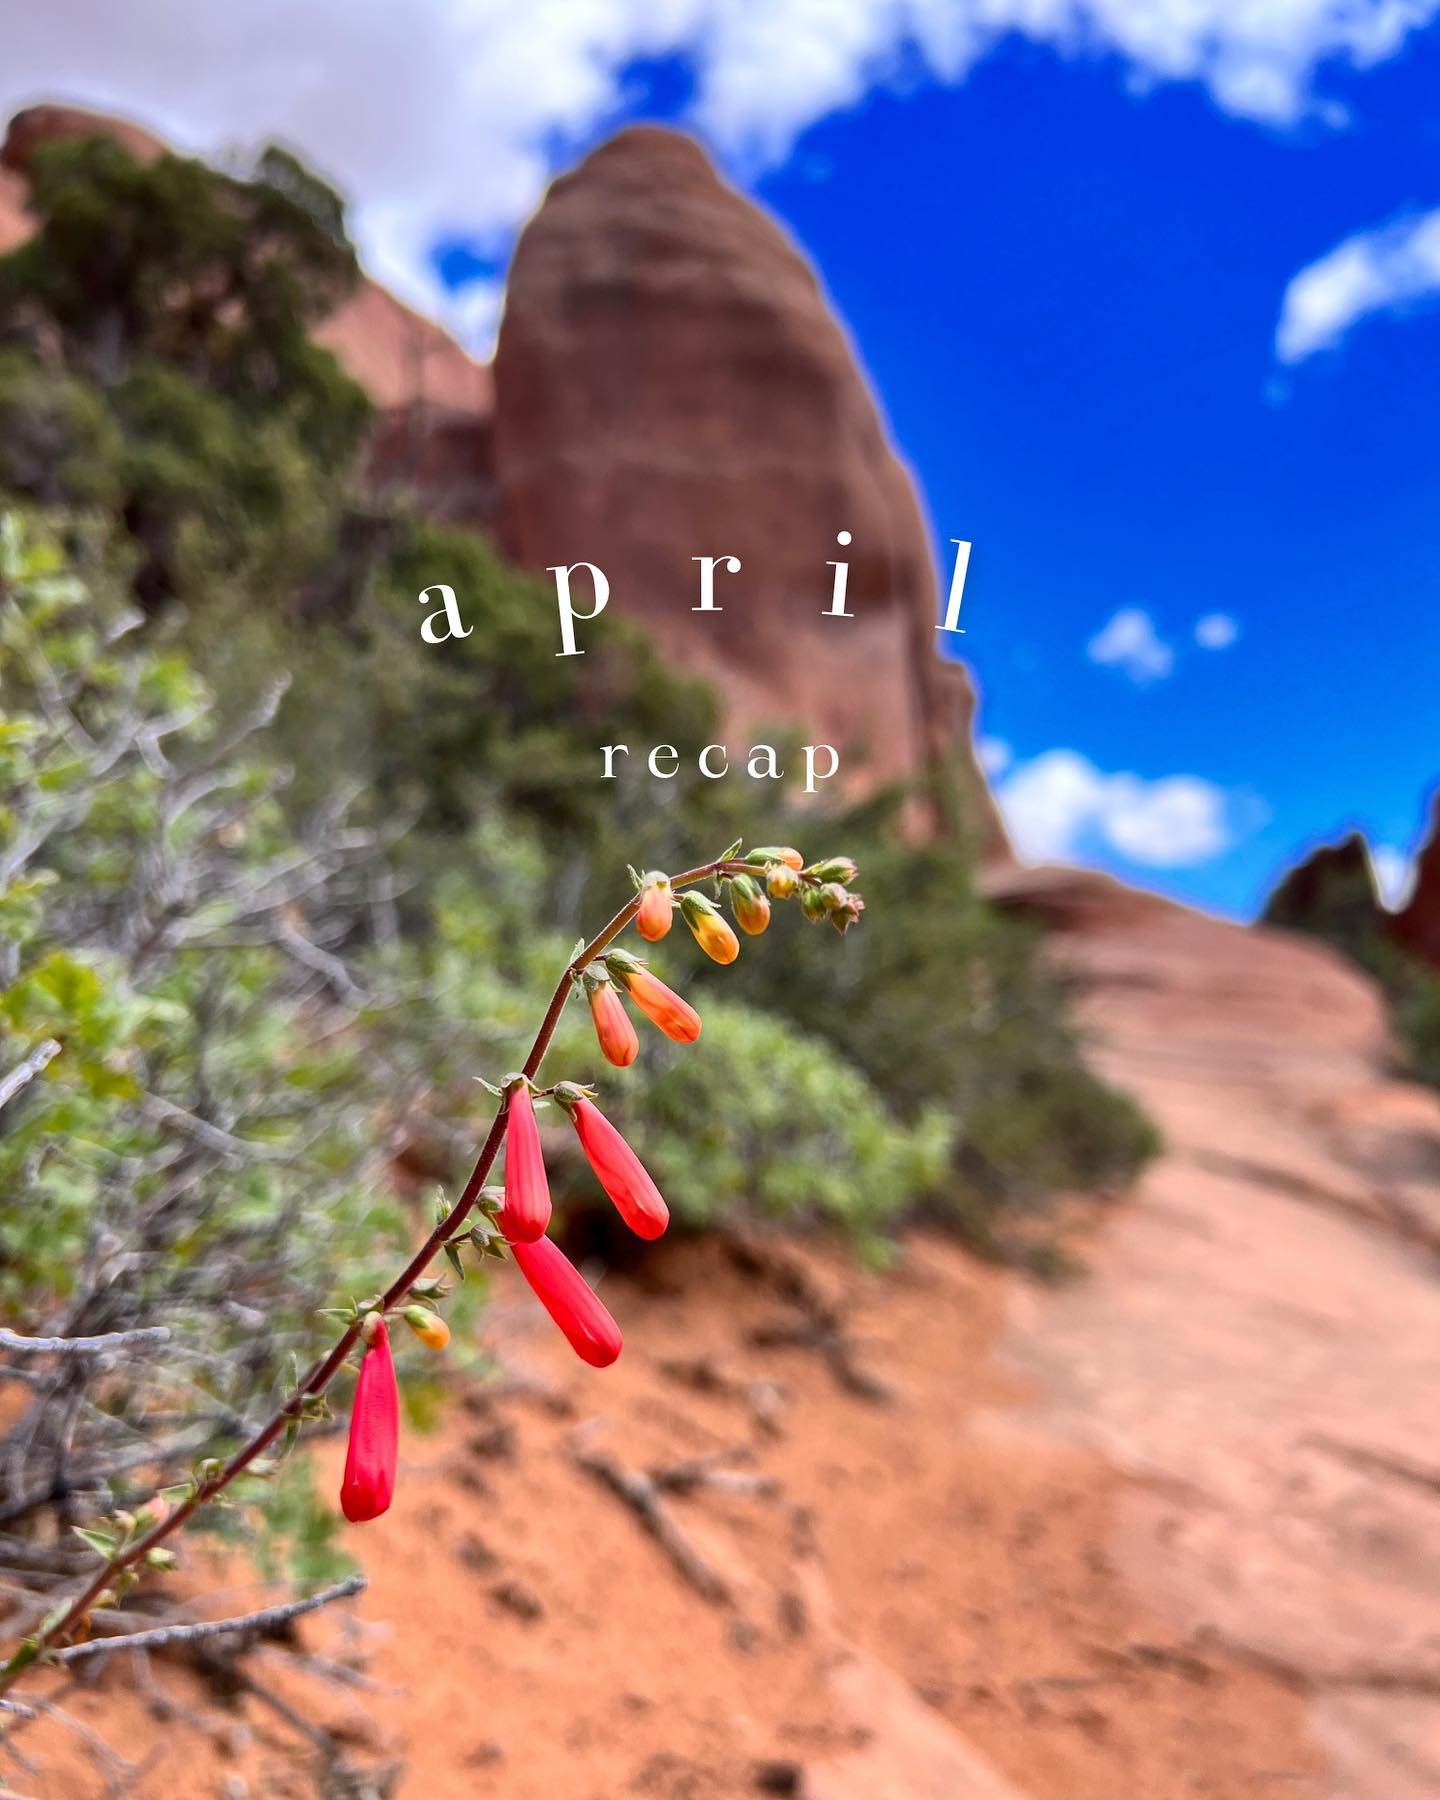 my APRIL RECAP 🌧️ 

Every month I reflect on what I&rsquo;ve done, where I&rsquo;ve been, what my goals are for next month, and enjoy posting the pictures that haven&rsquo;t seen the feed yet!

Hikes:
Malans Peak
Flag Rock
Industrial Arch
Frary Peak